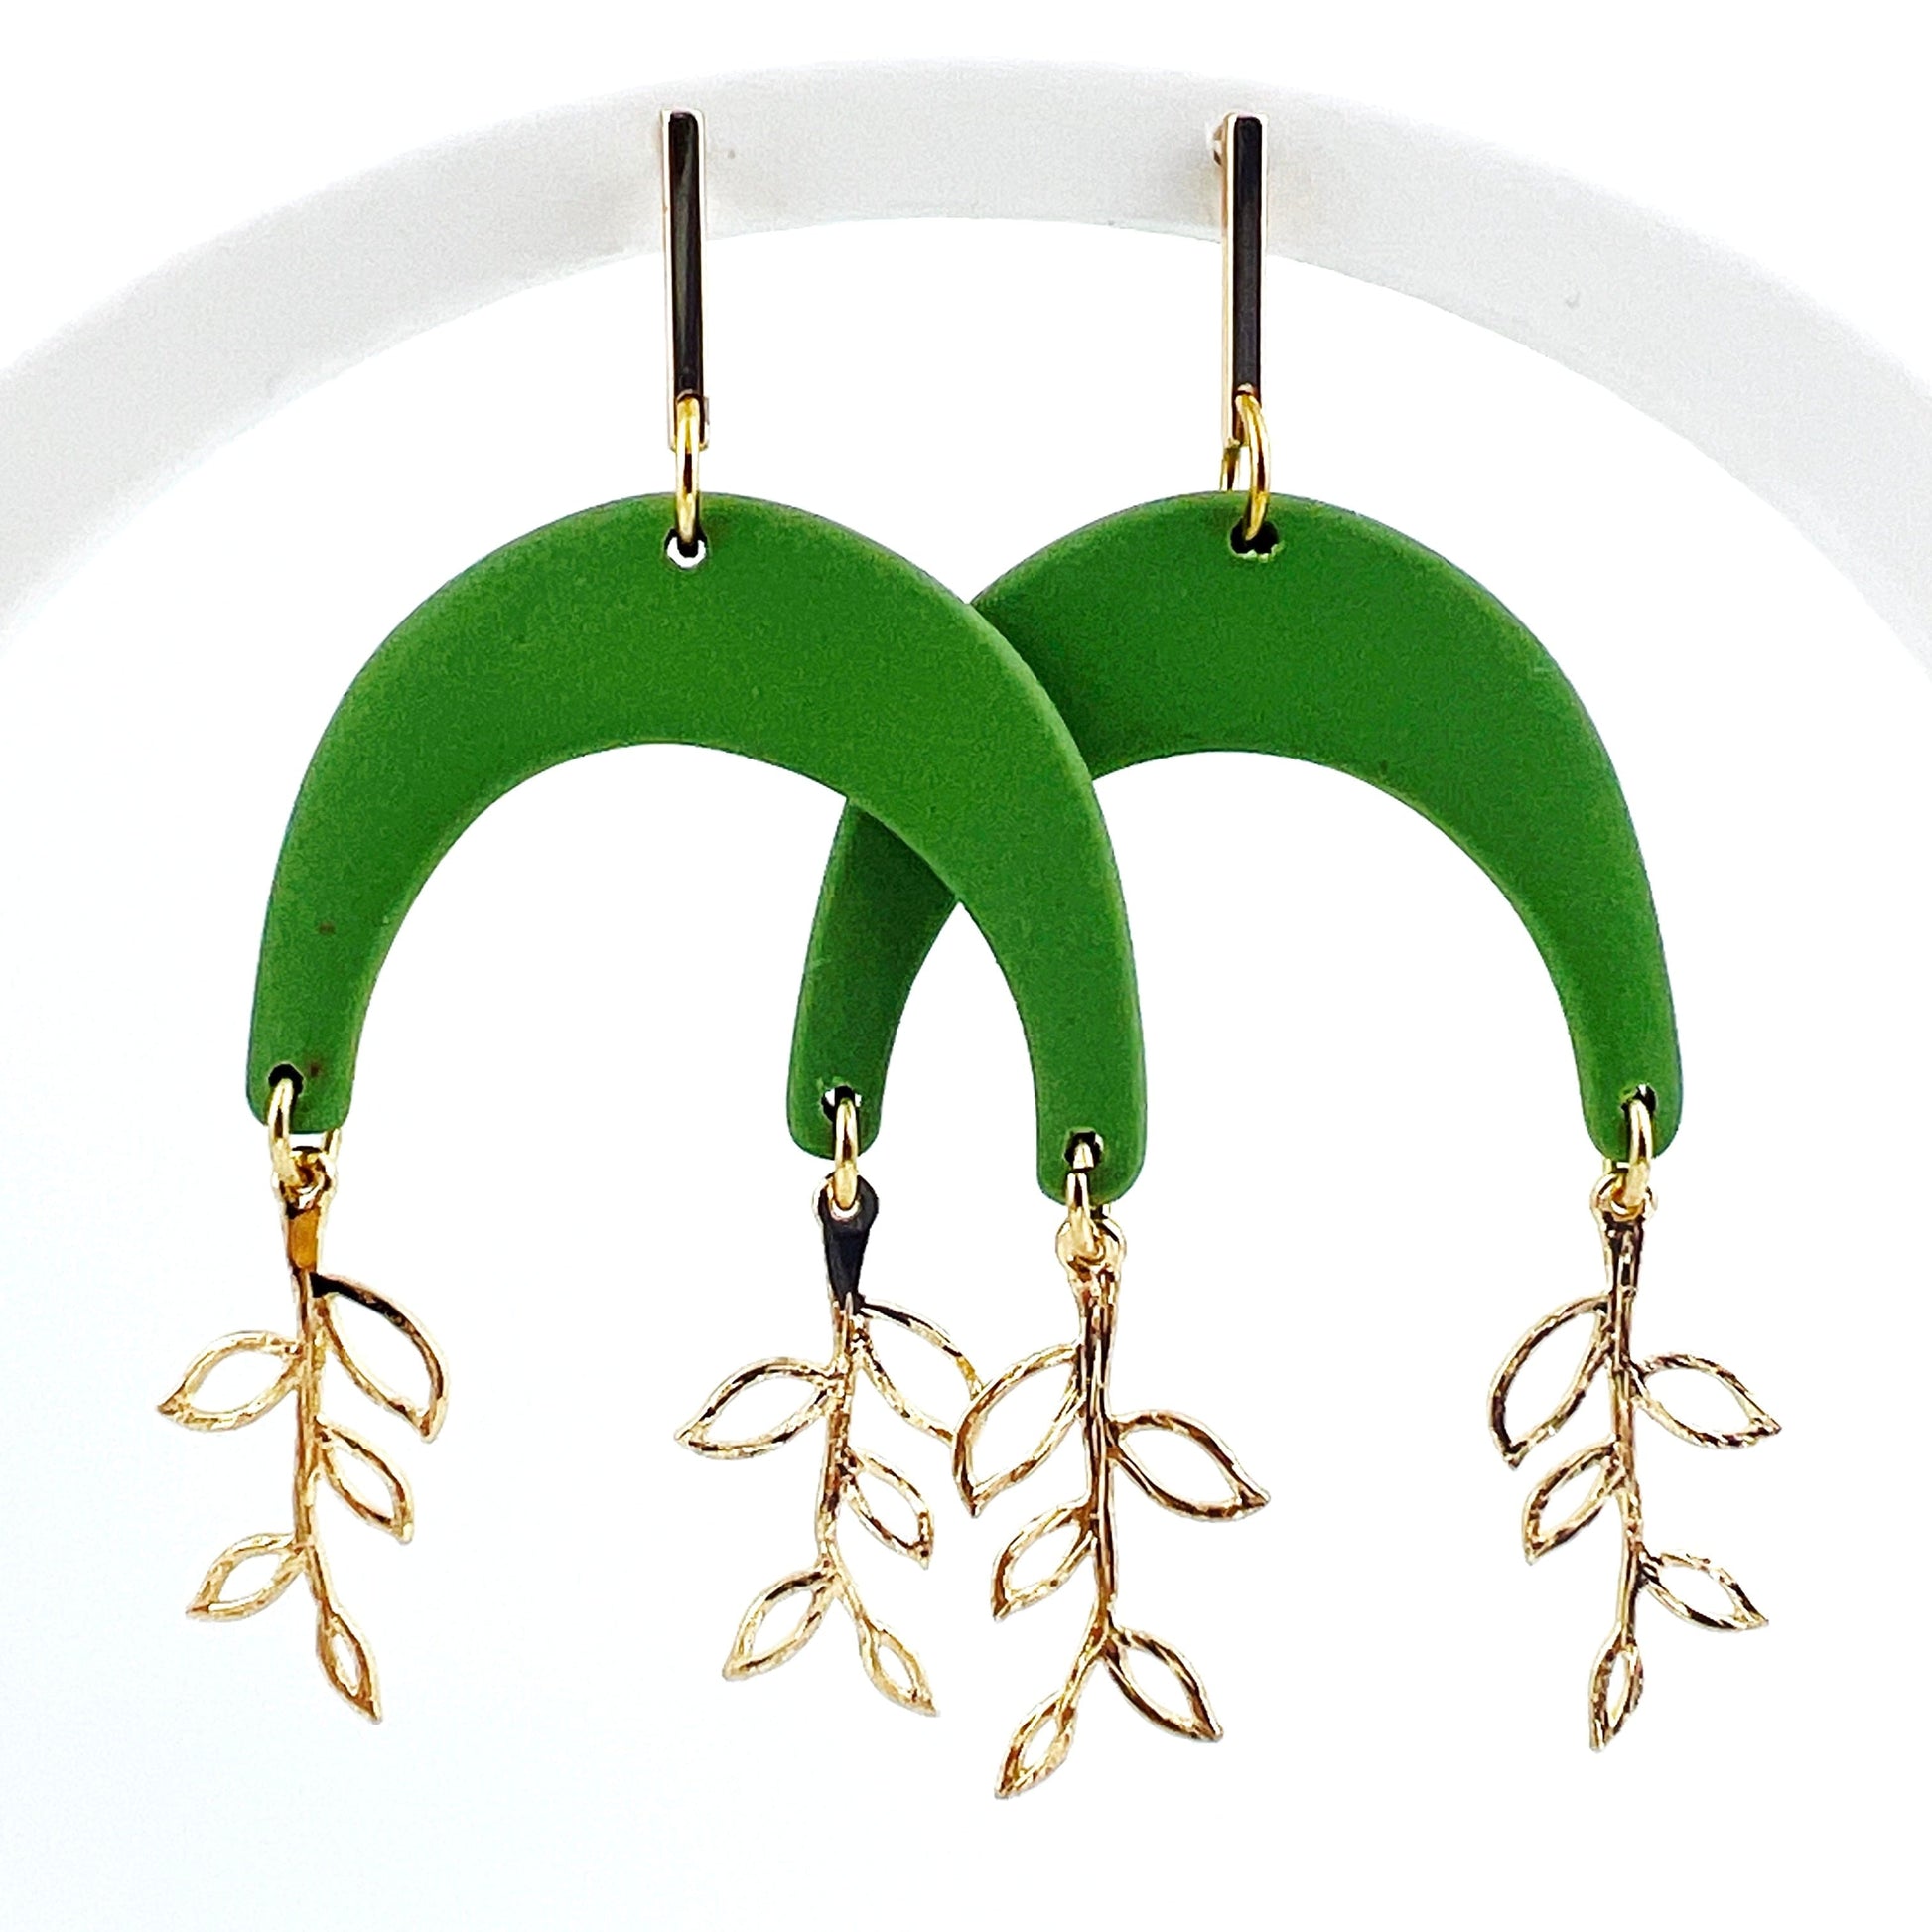 Earrings Green Arches with Gold Vine Charms Earrings